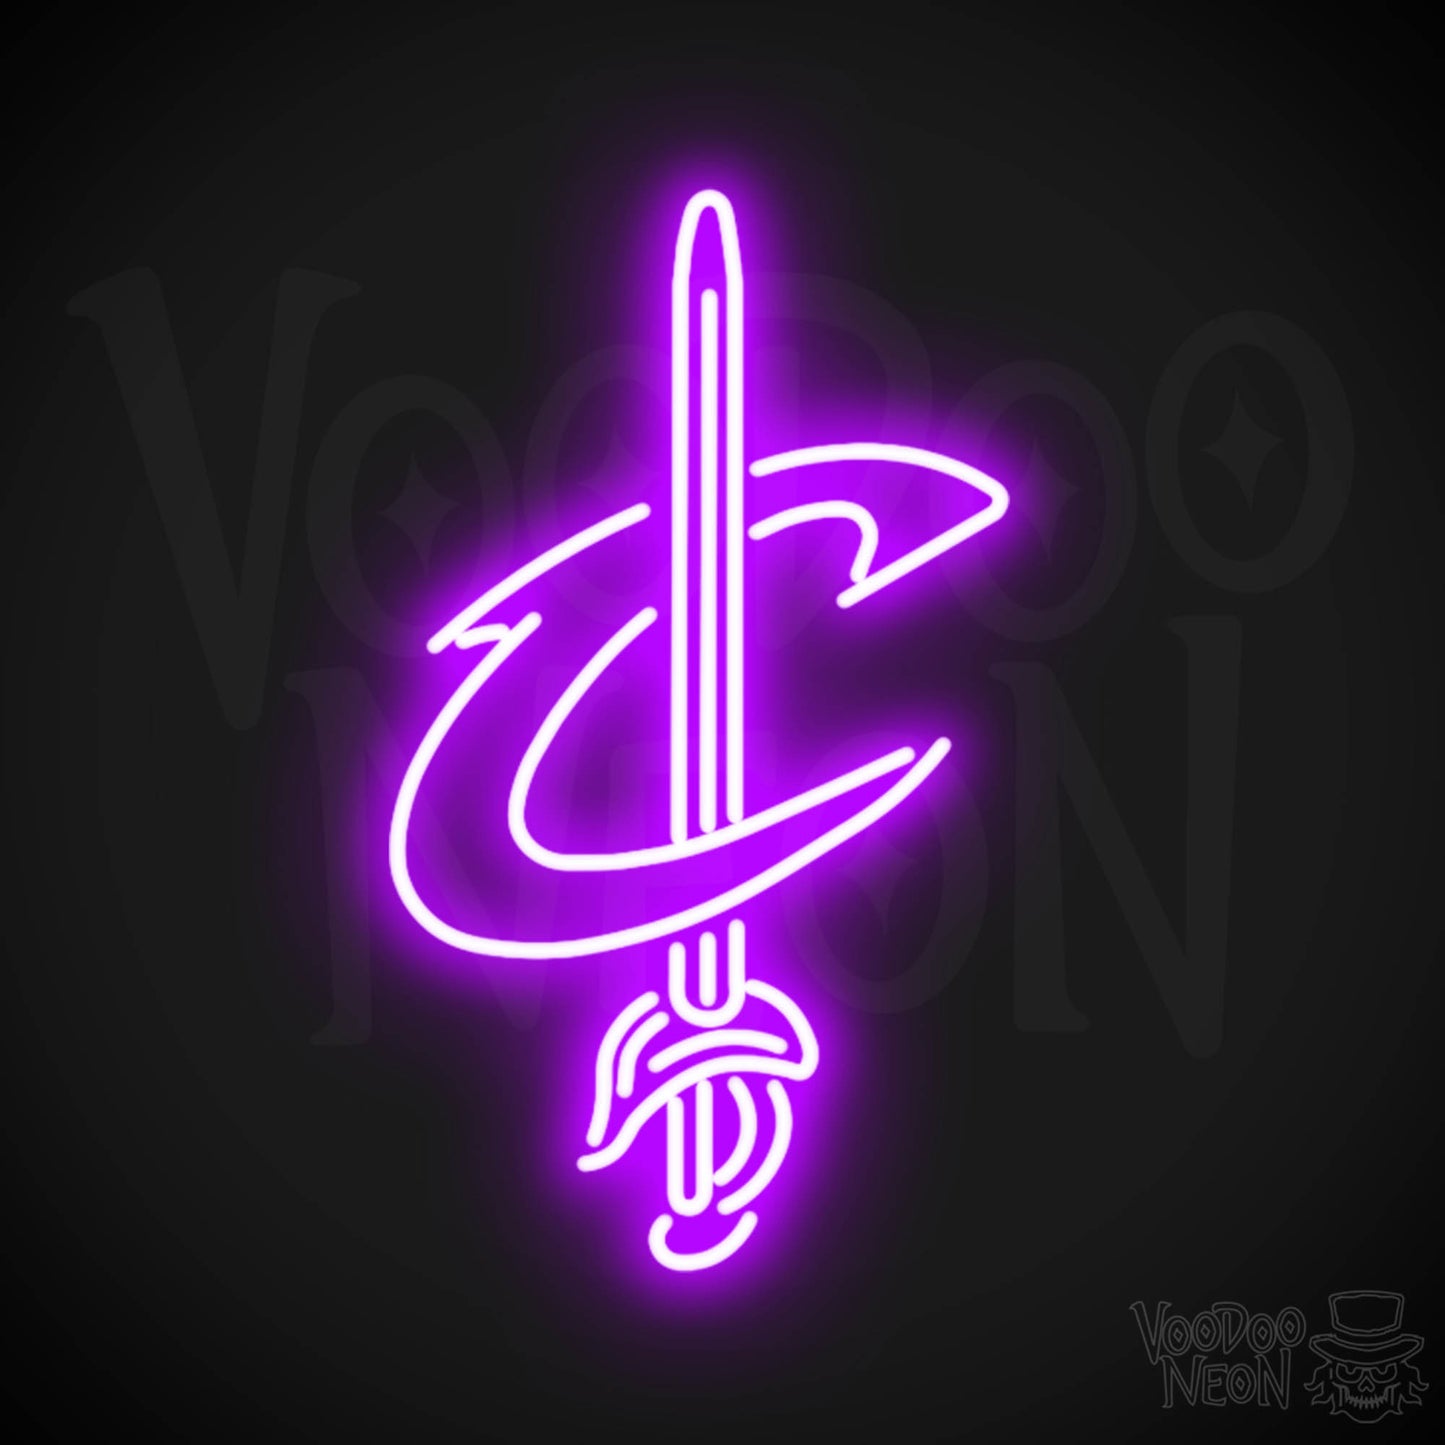 Cleveland Cavaliers Neon Sign - Cleveland Cavaliers Sign - Neon Cavaliers Wall Art - Color Purple